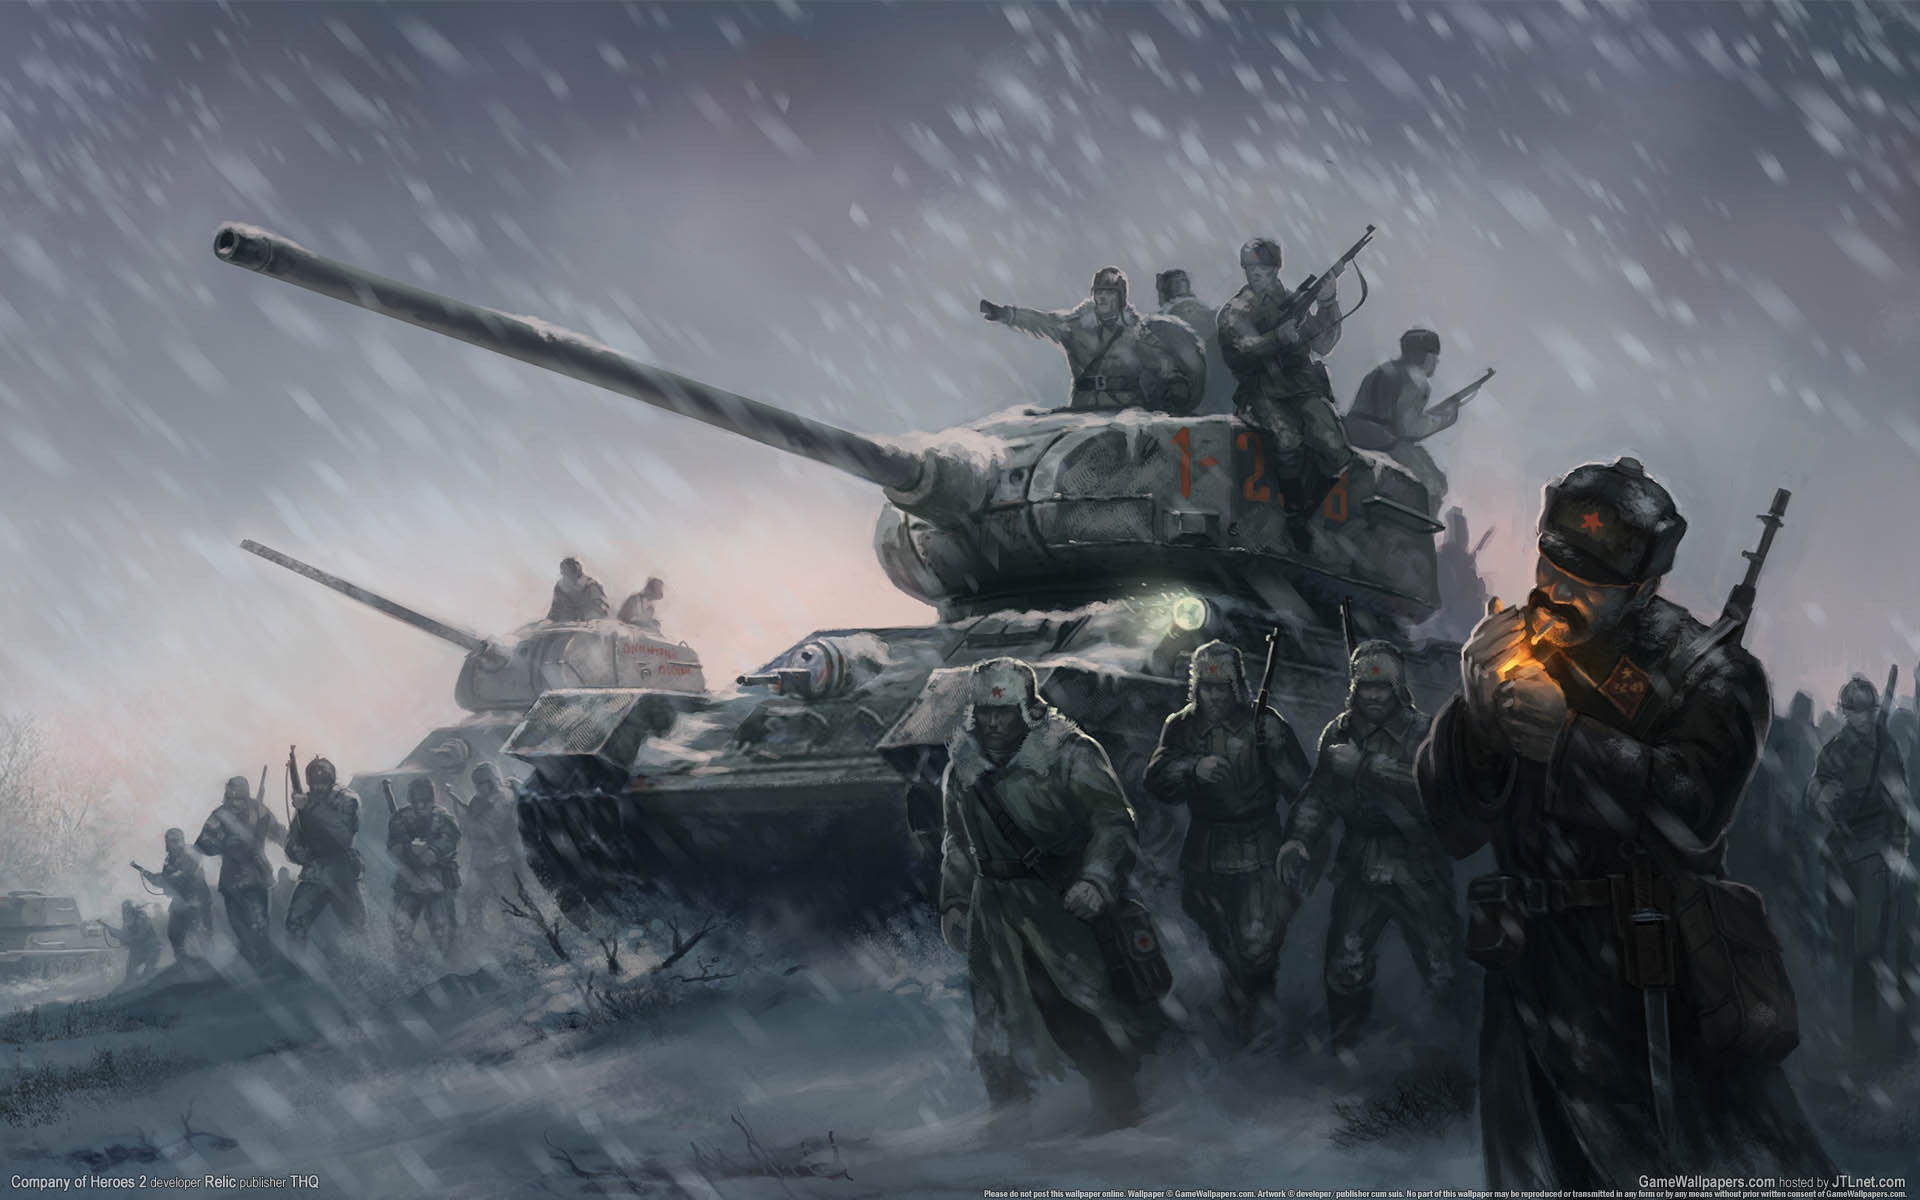 Company of Heroes 2 for 1920 x 1200 widescreen resolution